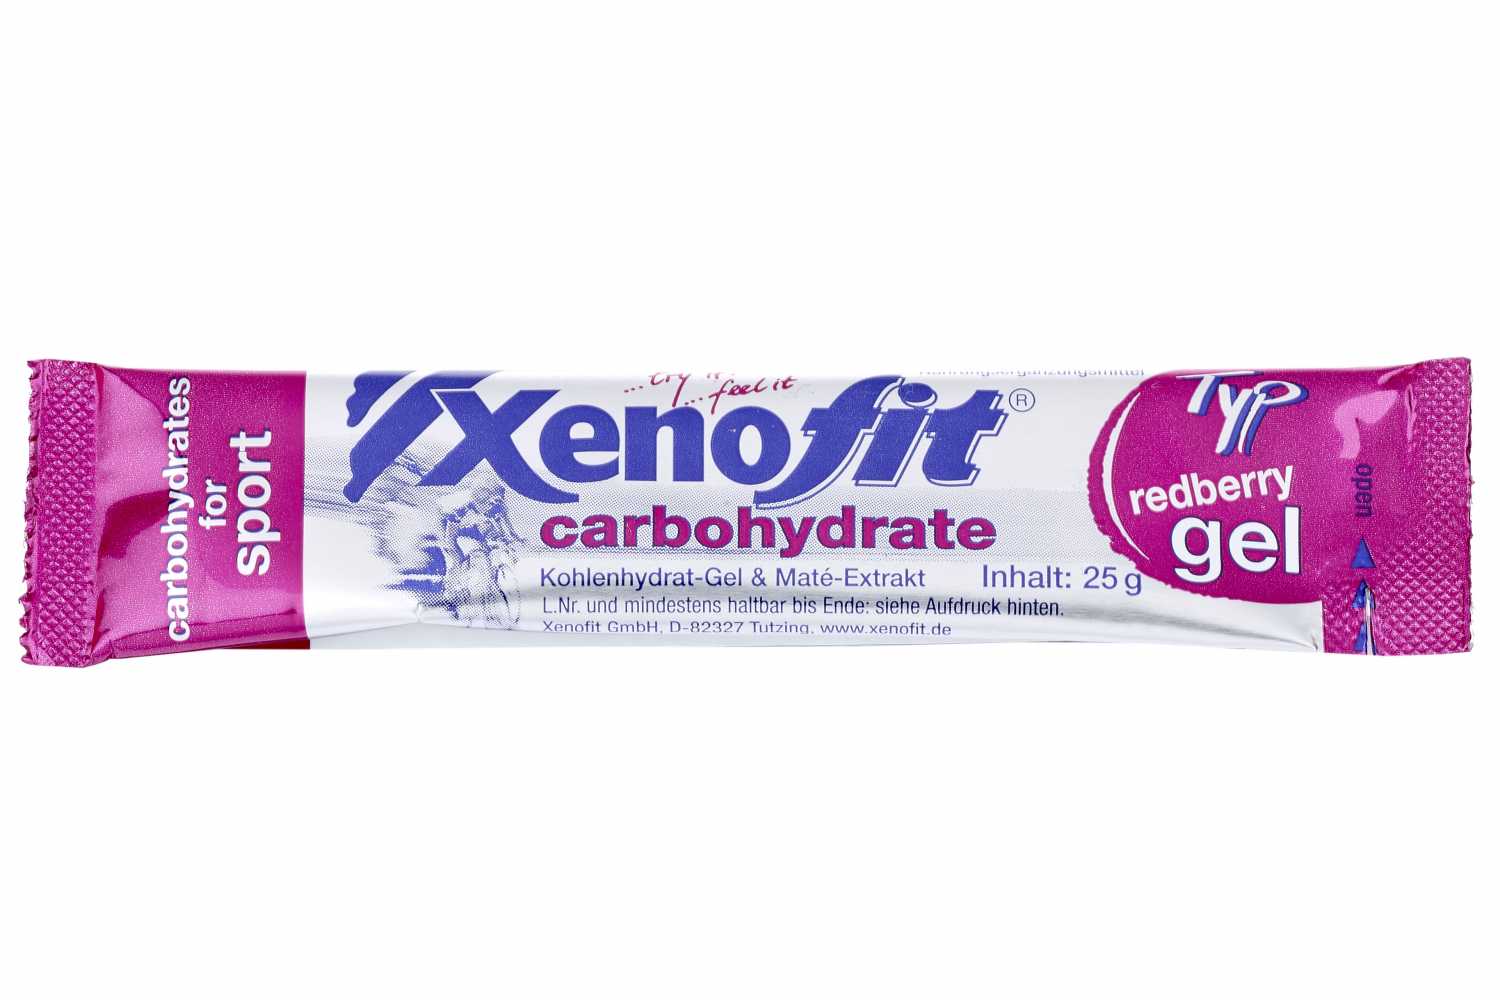 Xenofit carbohydrate_gel_redberry_25g_15x10